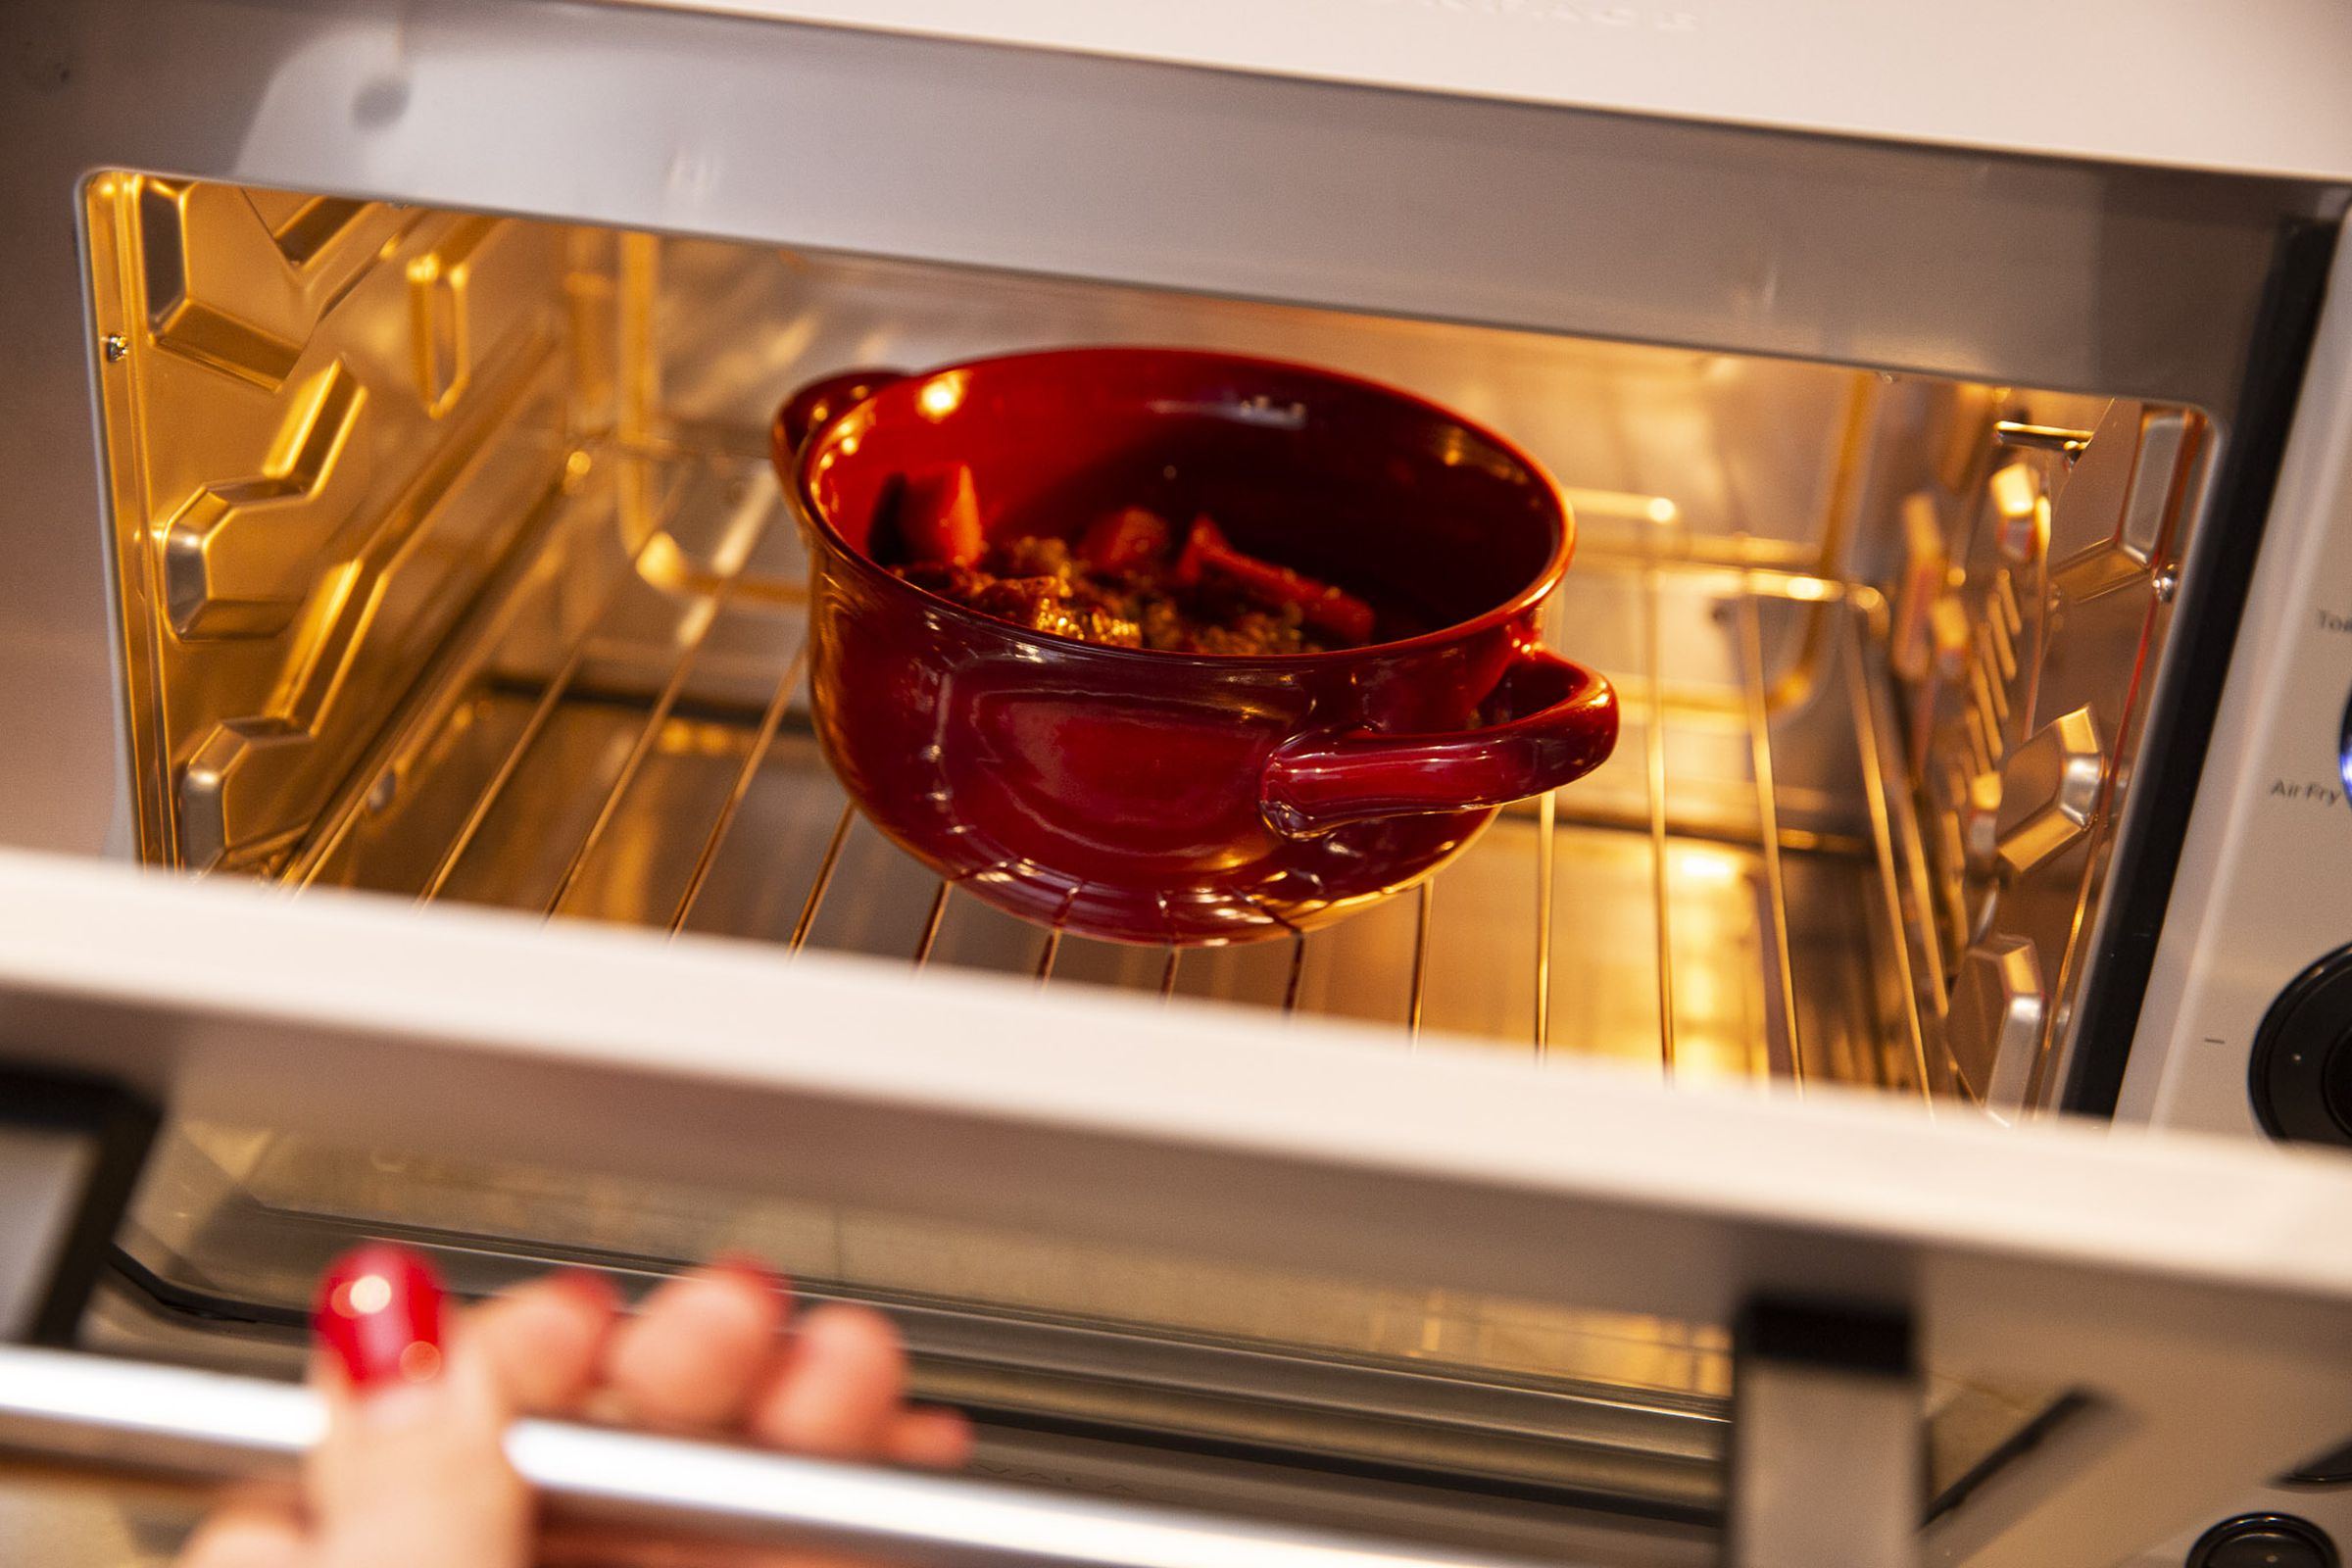 A red bowl in a small countertop oven with the door open.